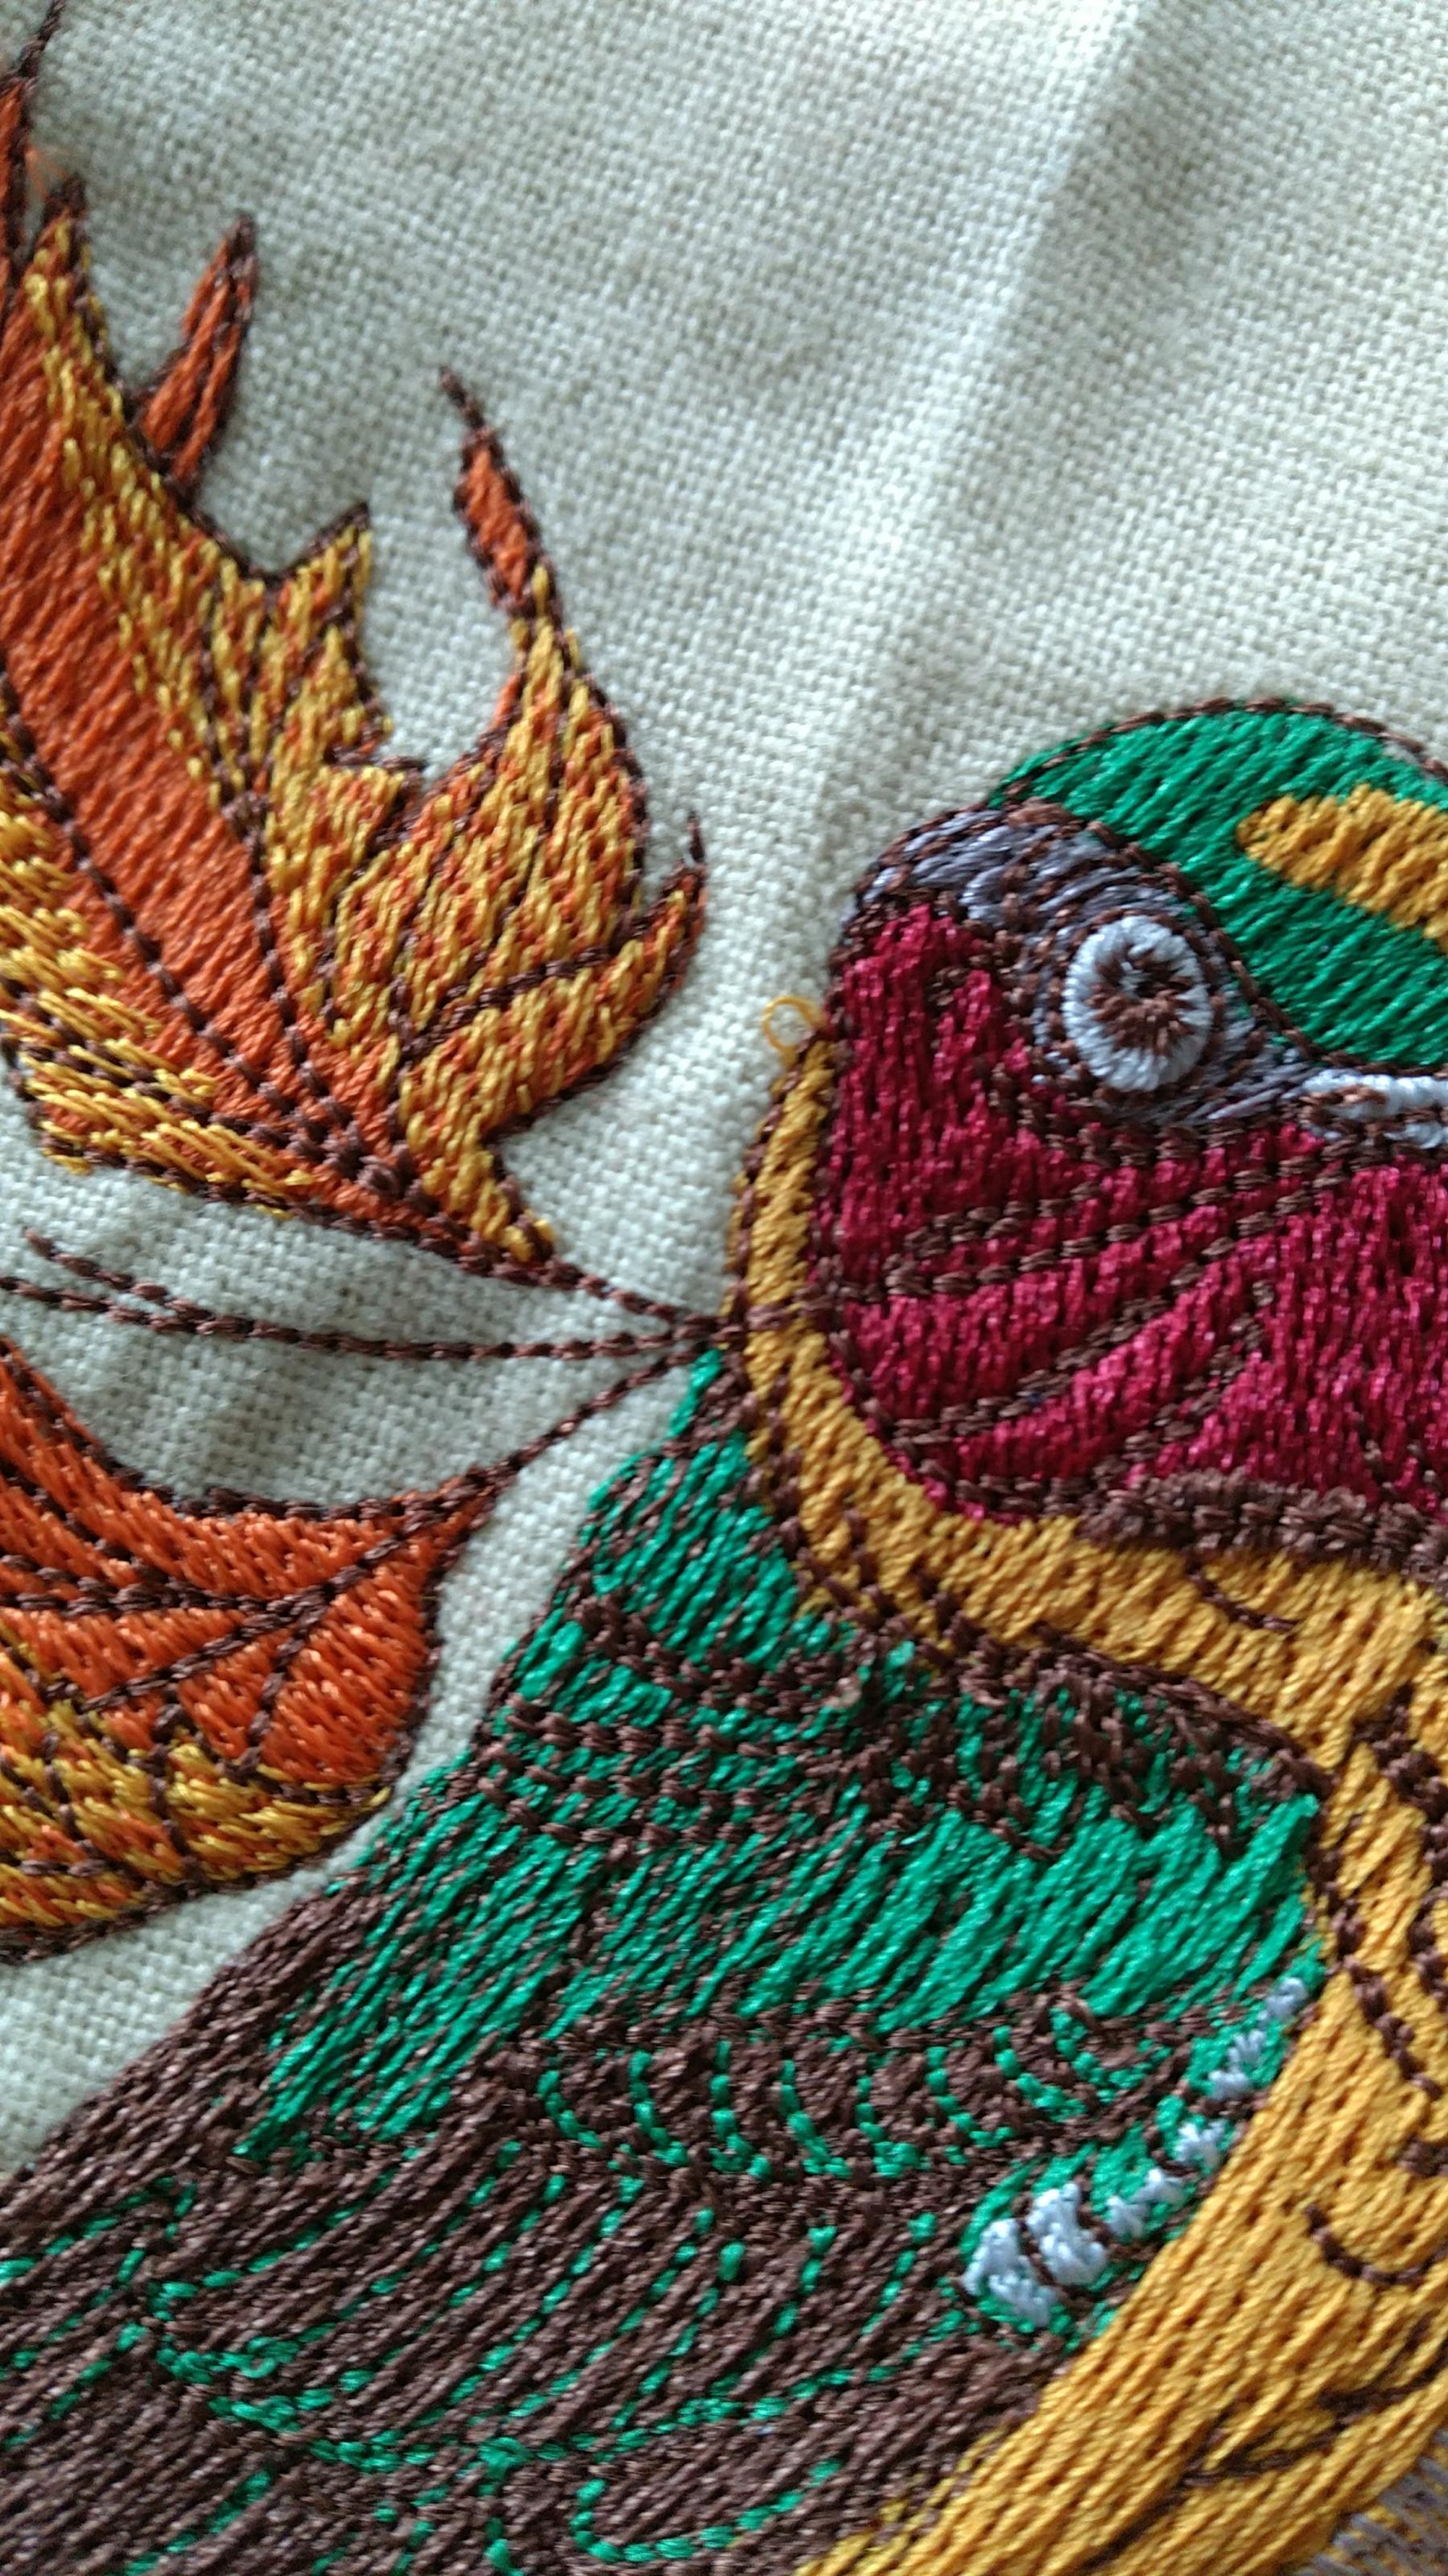 Detail of siberian rubythroat embroidery design